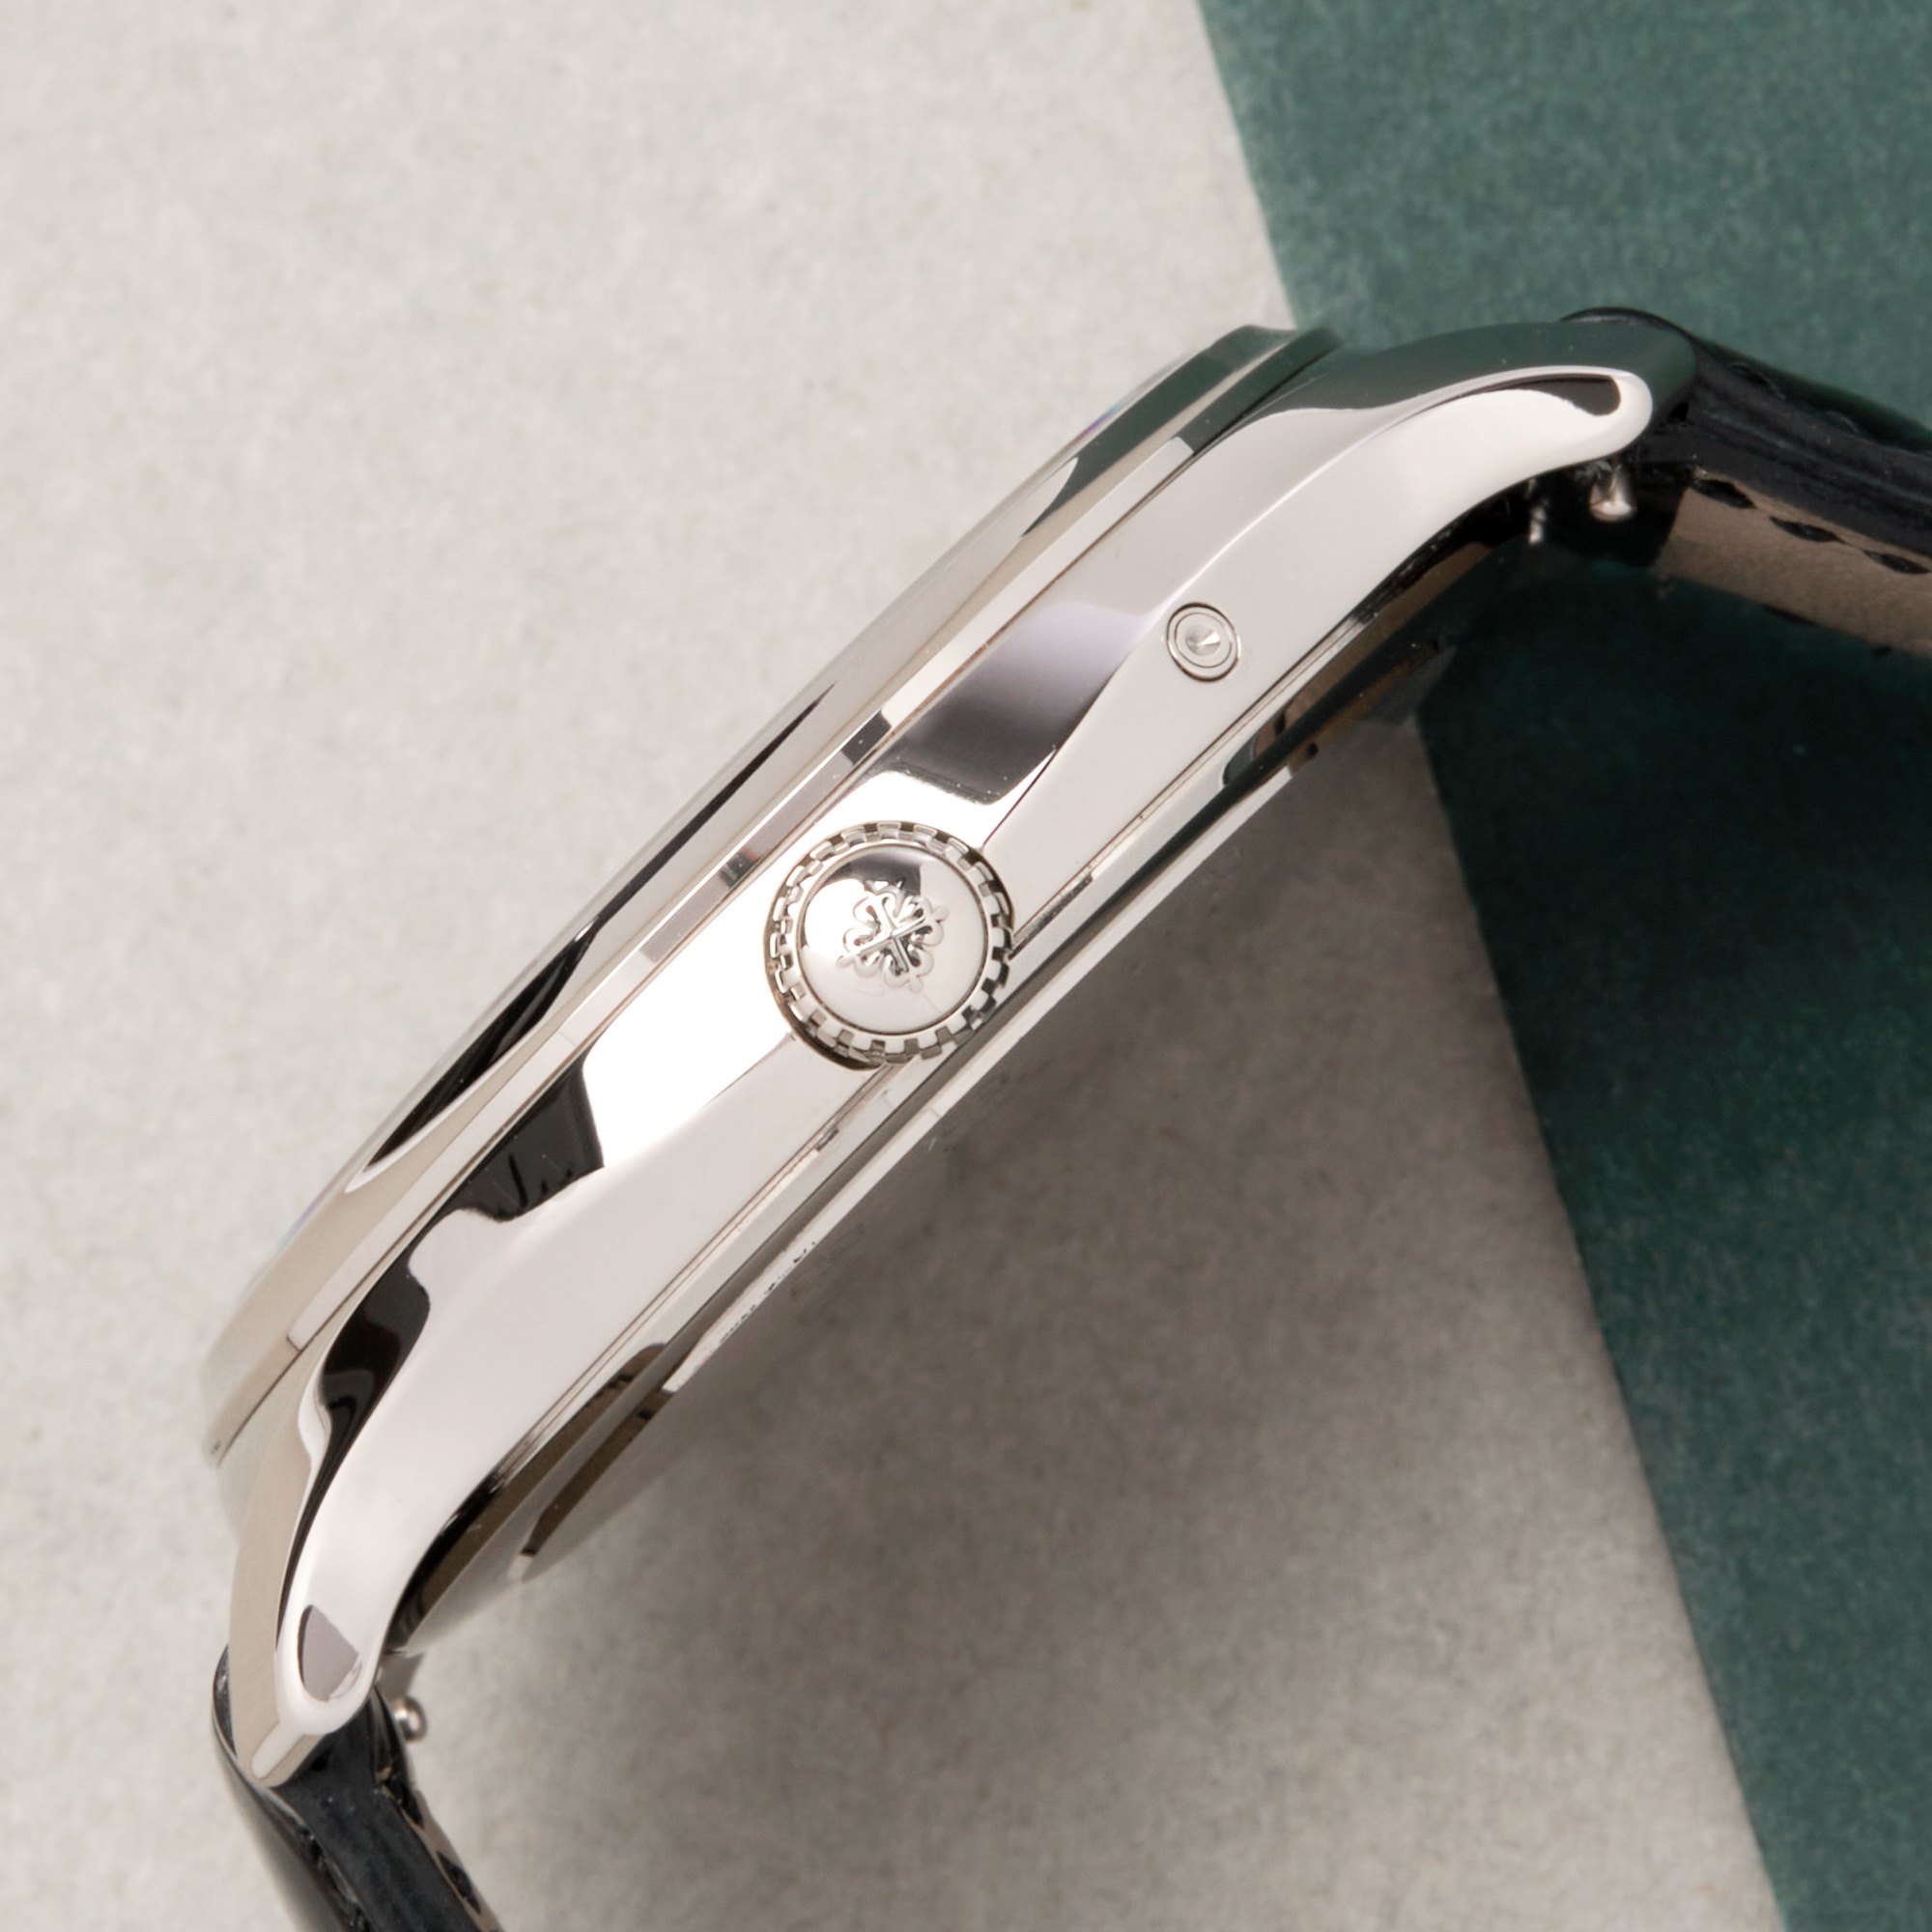 Patek Philippe Complications Limited Edition Of 1300 Pieces for 175 of Patek Philippe 18K White Gold 5575G-001